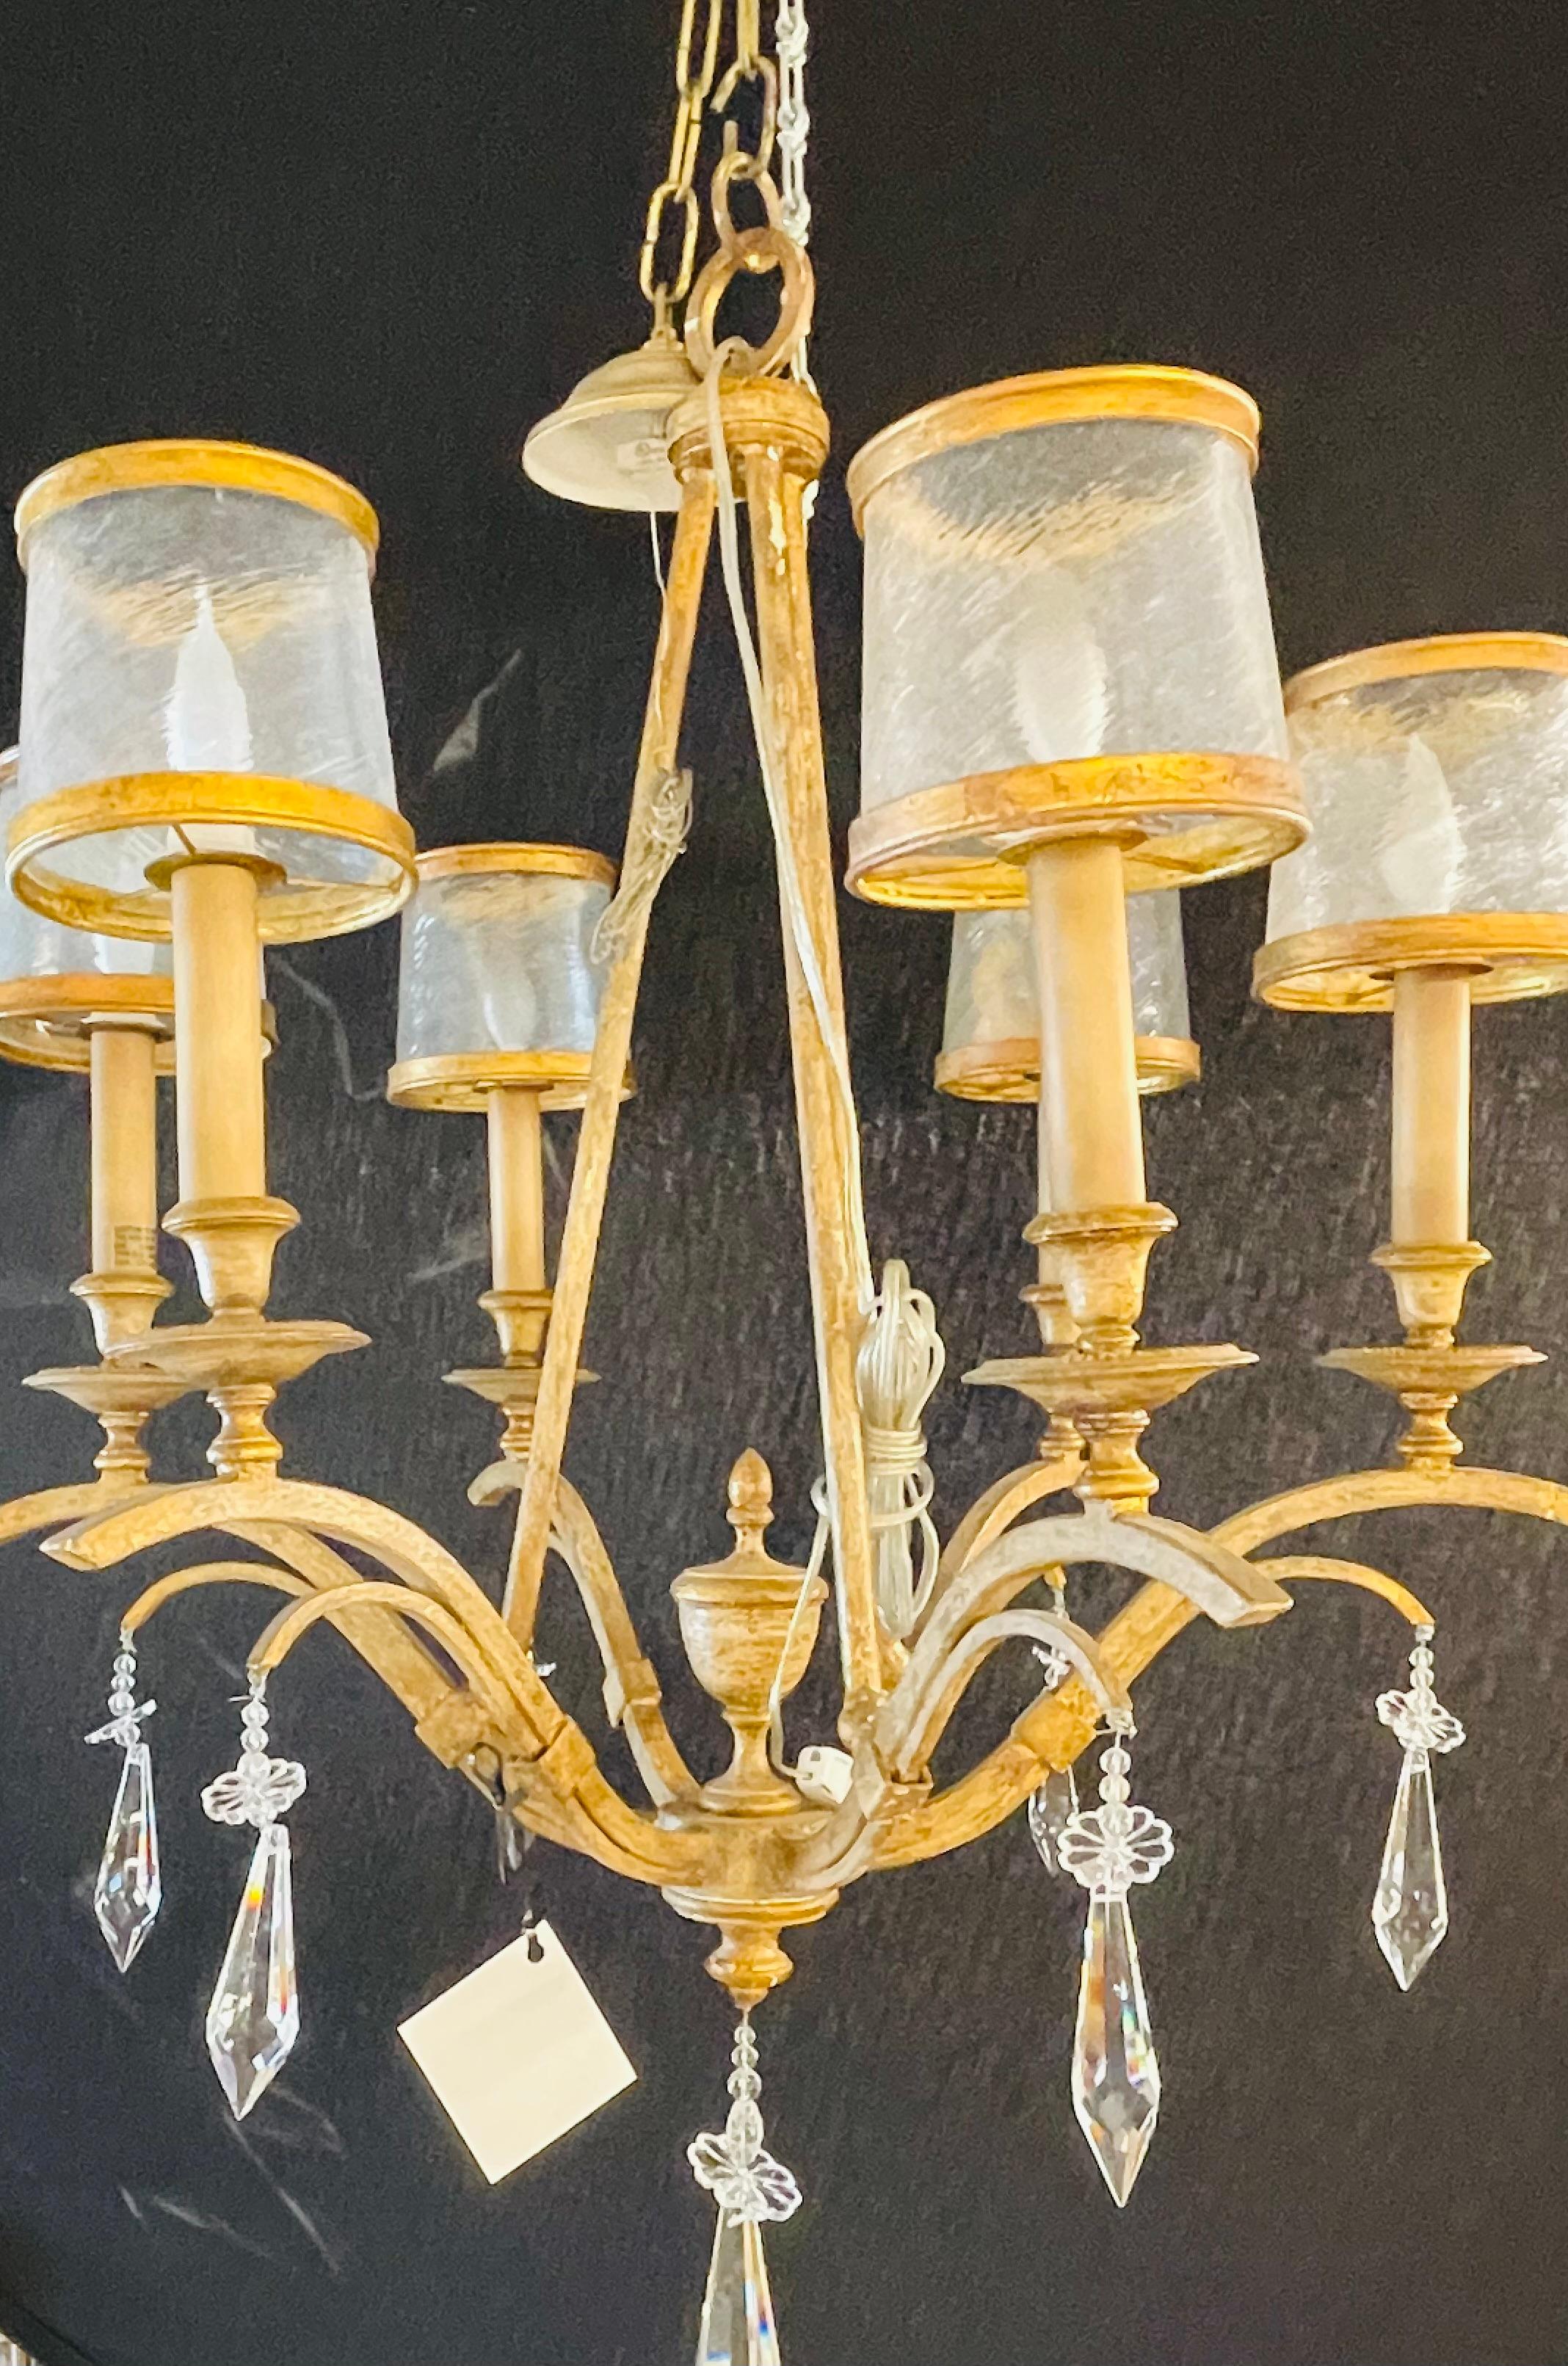 An Italian gilt metal and crystal chandelier with glass shades. This recently wired ceiling light brings glamour and glitz to any room that it would hung in. With its large hanging crystals statically placed to reflect light and shine this six-arm